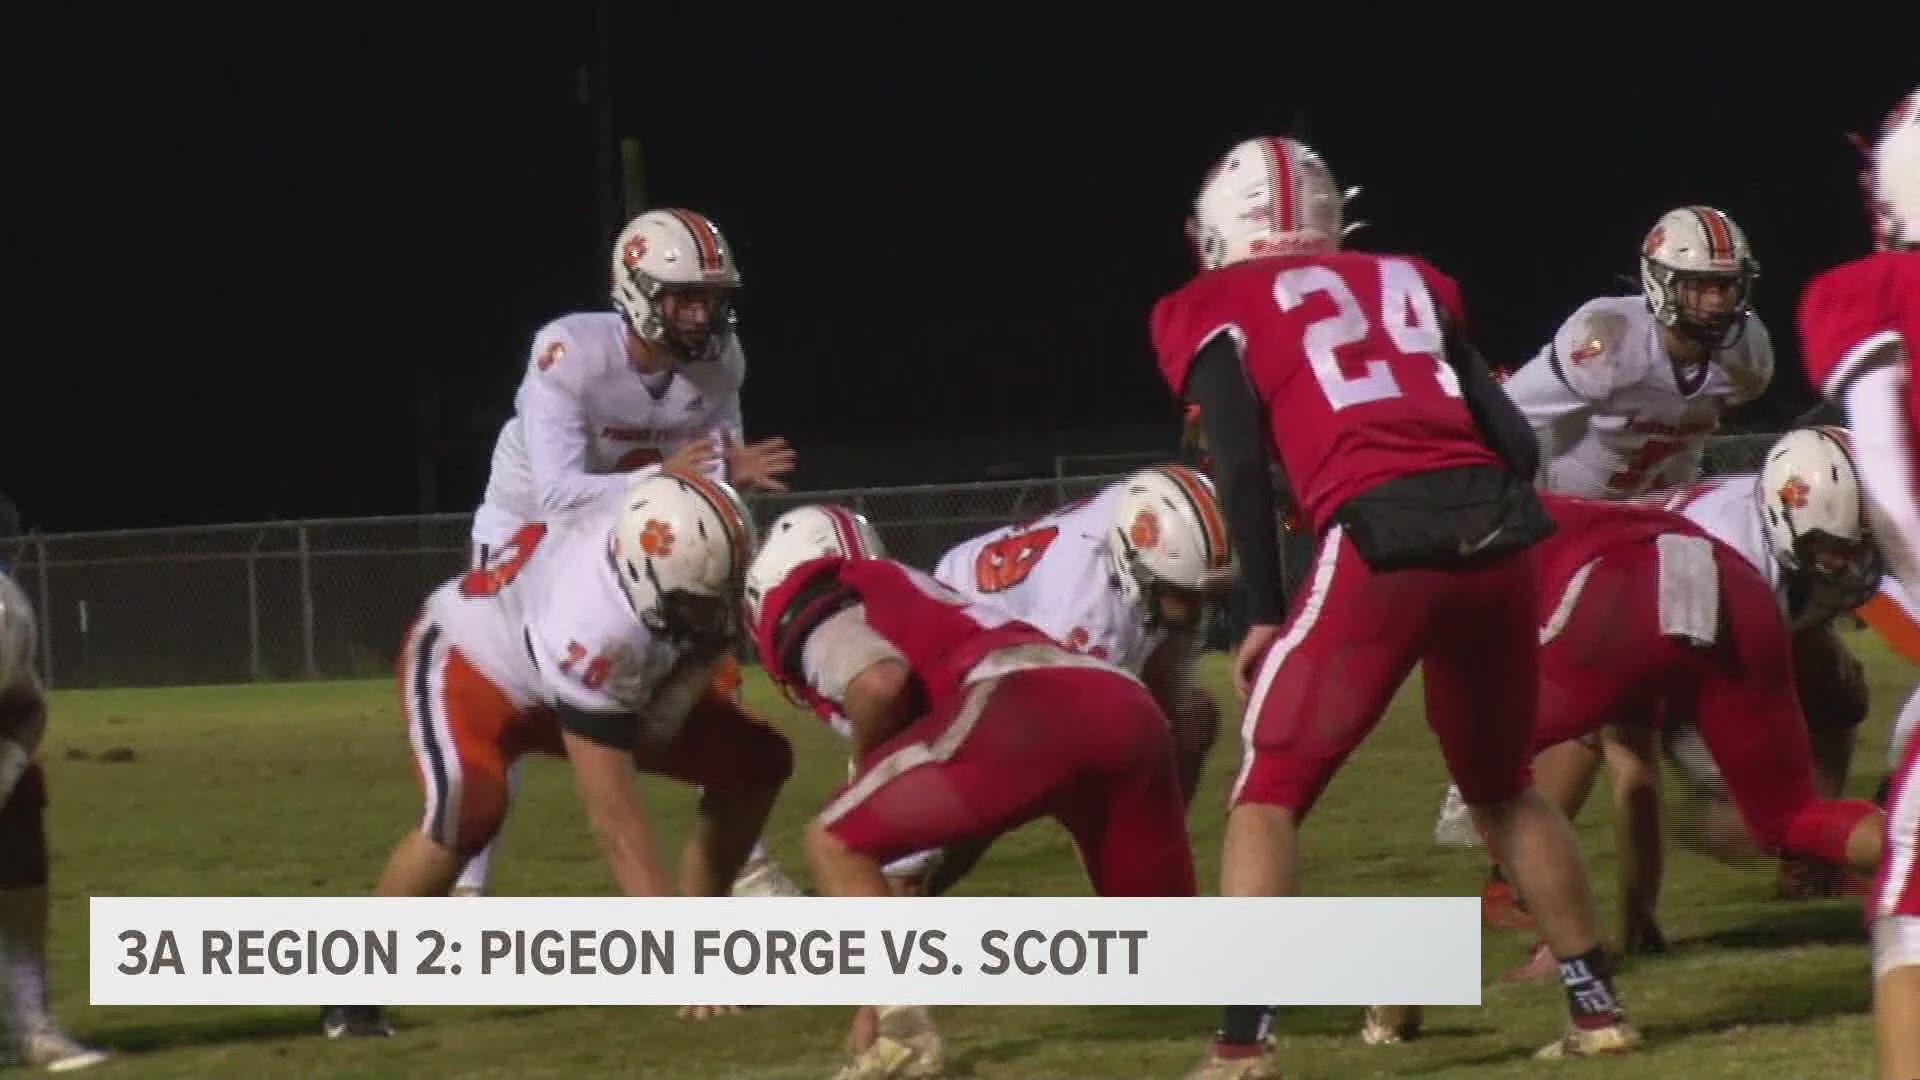 In what was essentially a playoff game, Pigeon Forge comes out on top.